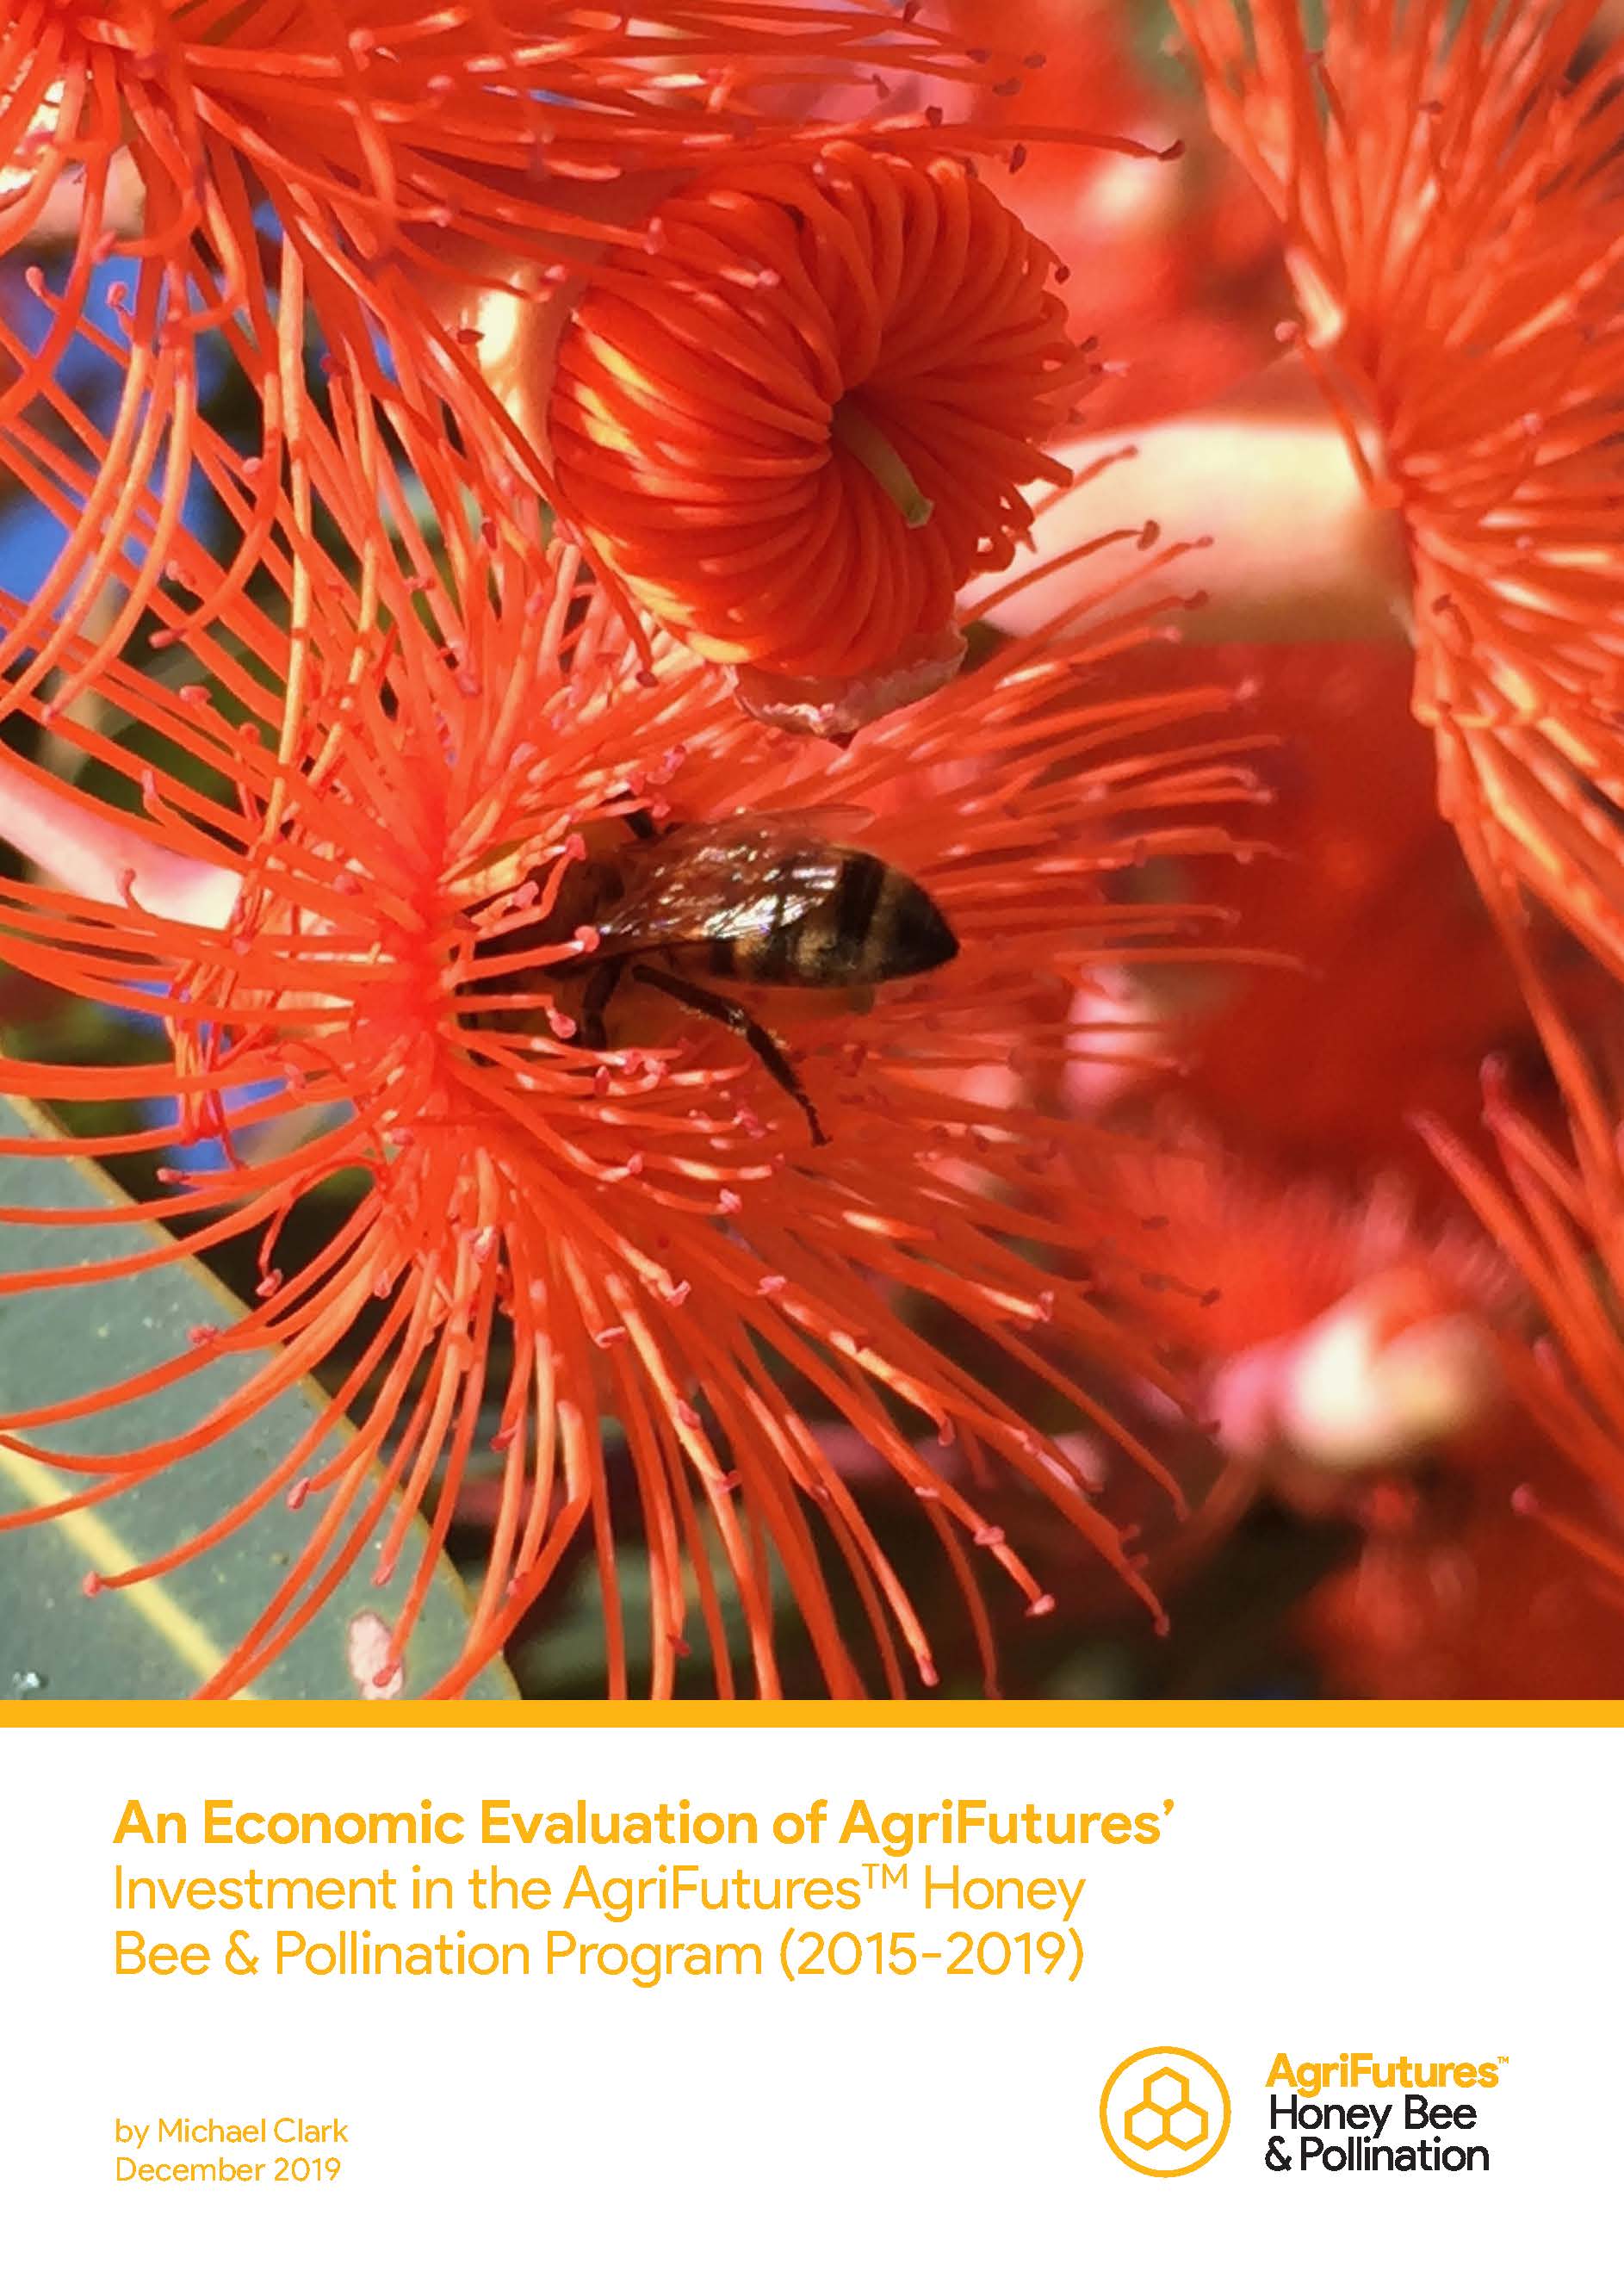 An Economic Evaluation of AgriFutures’ Investment in the AgriFuturesTM Honey Bee & Pollination Program (2015-2019) - image